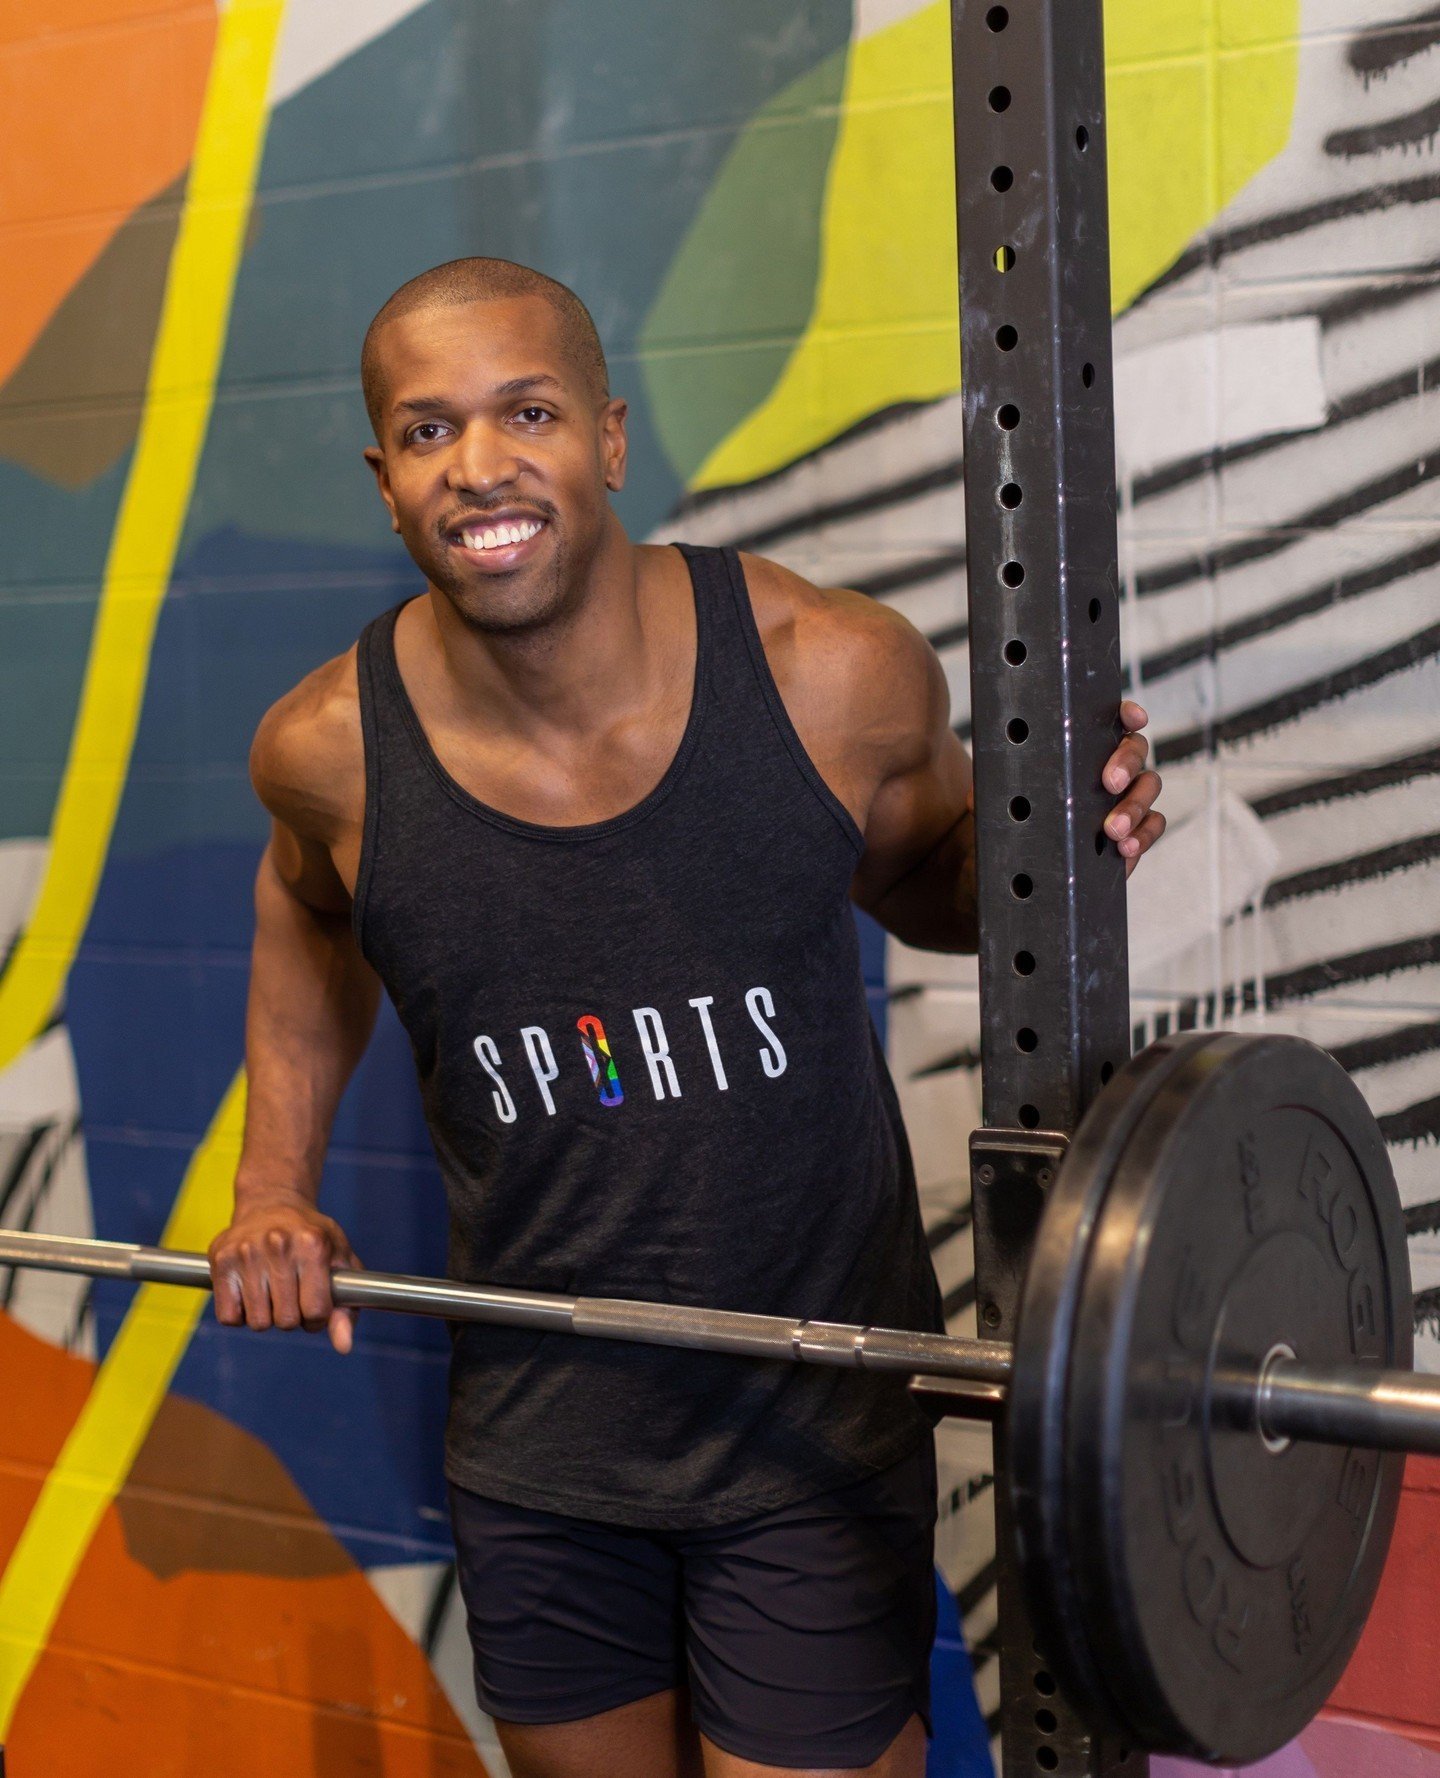 Own the gym and own the look with the perfect tank to show off your muscles💪🔥⁠
#lgbtq #lifting #smallbusiness